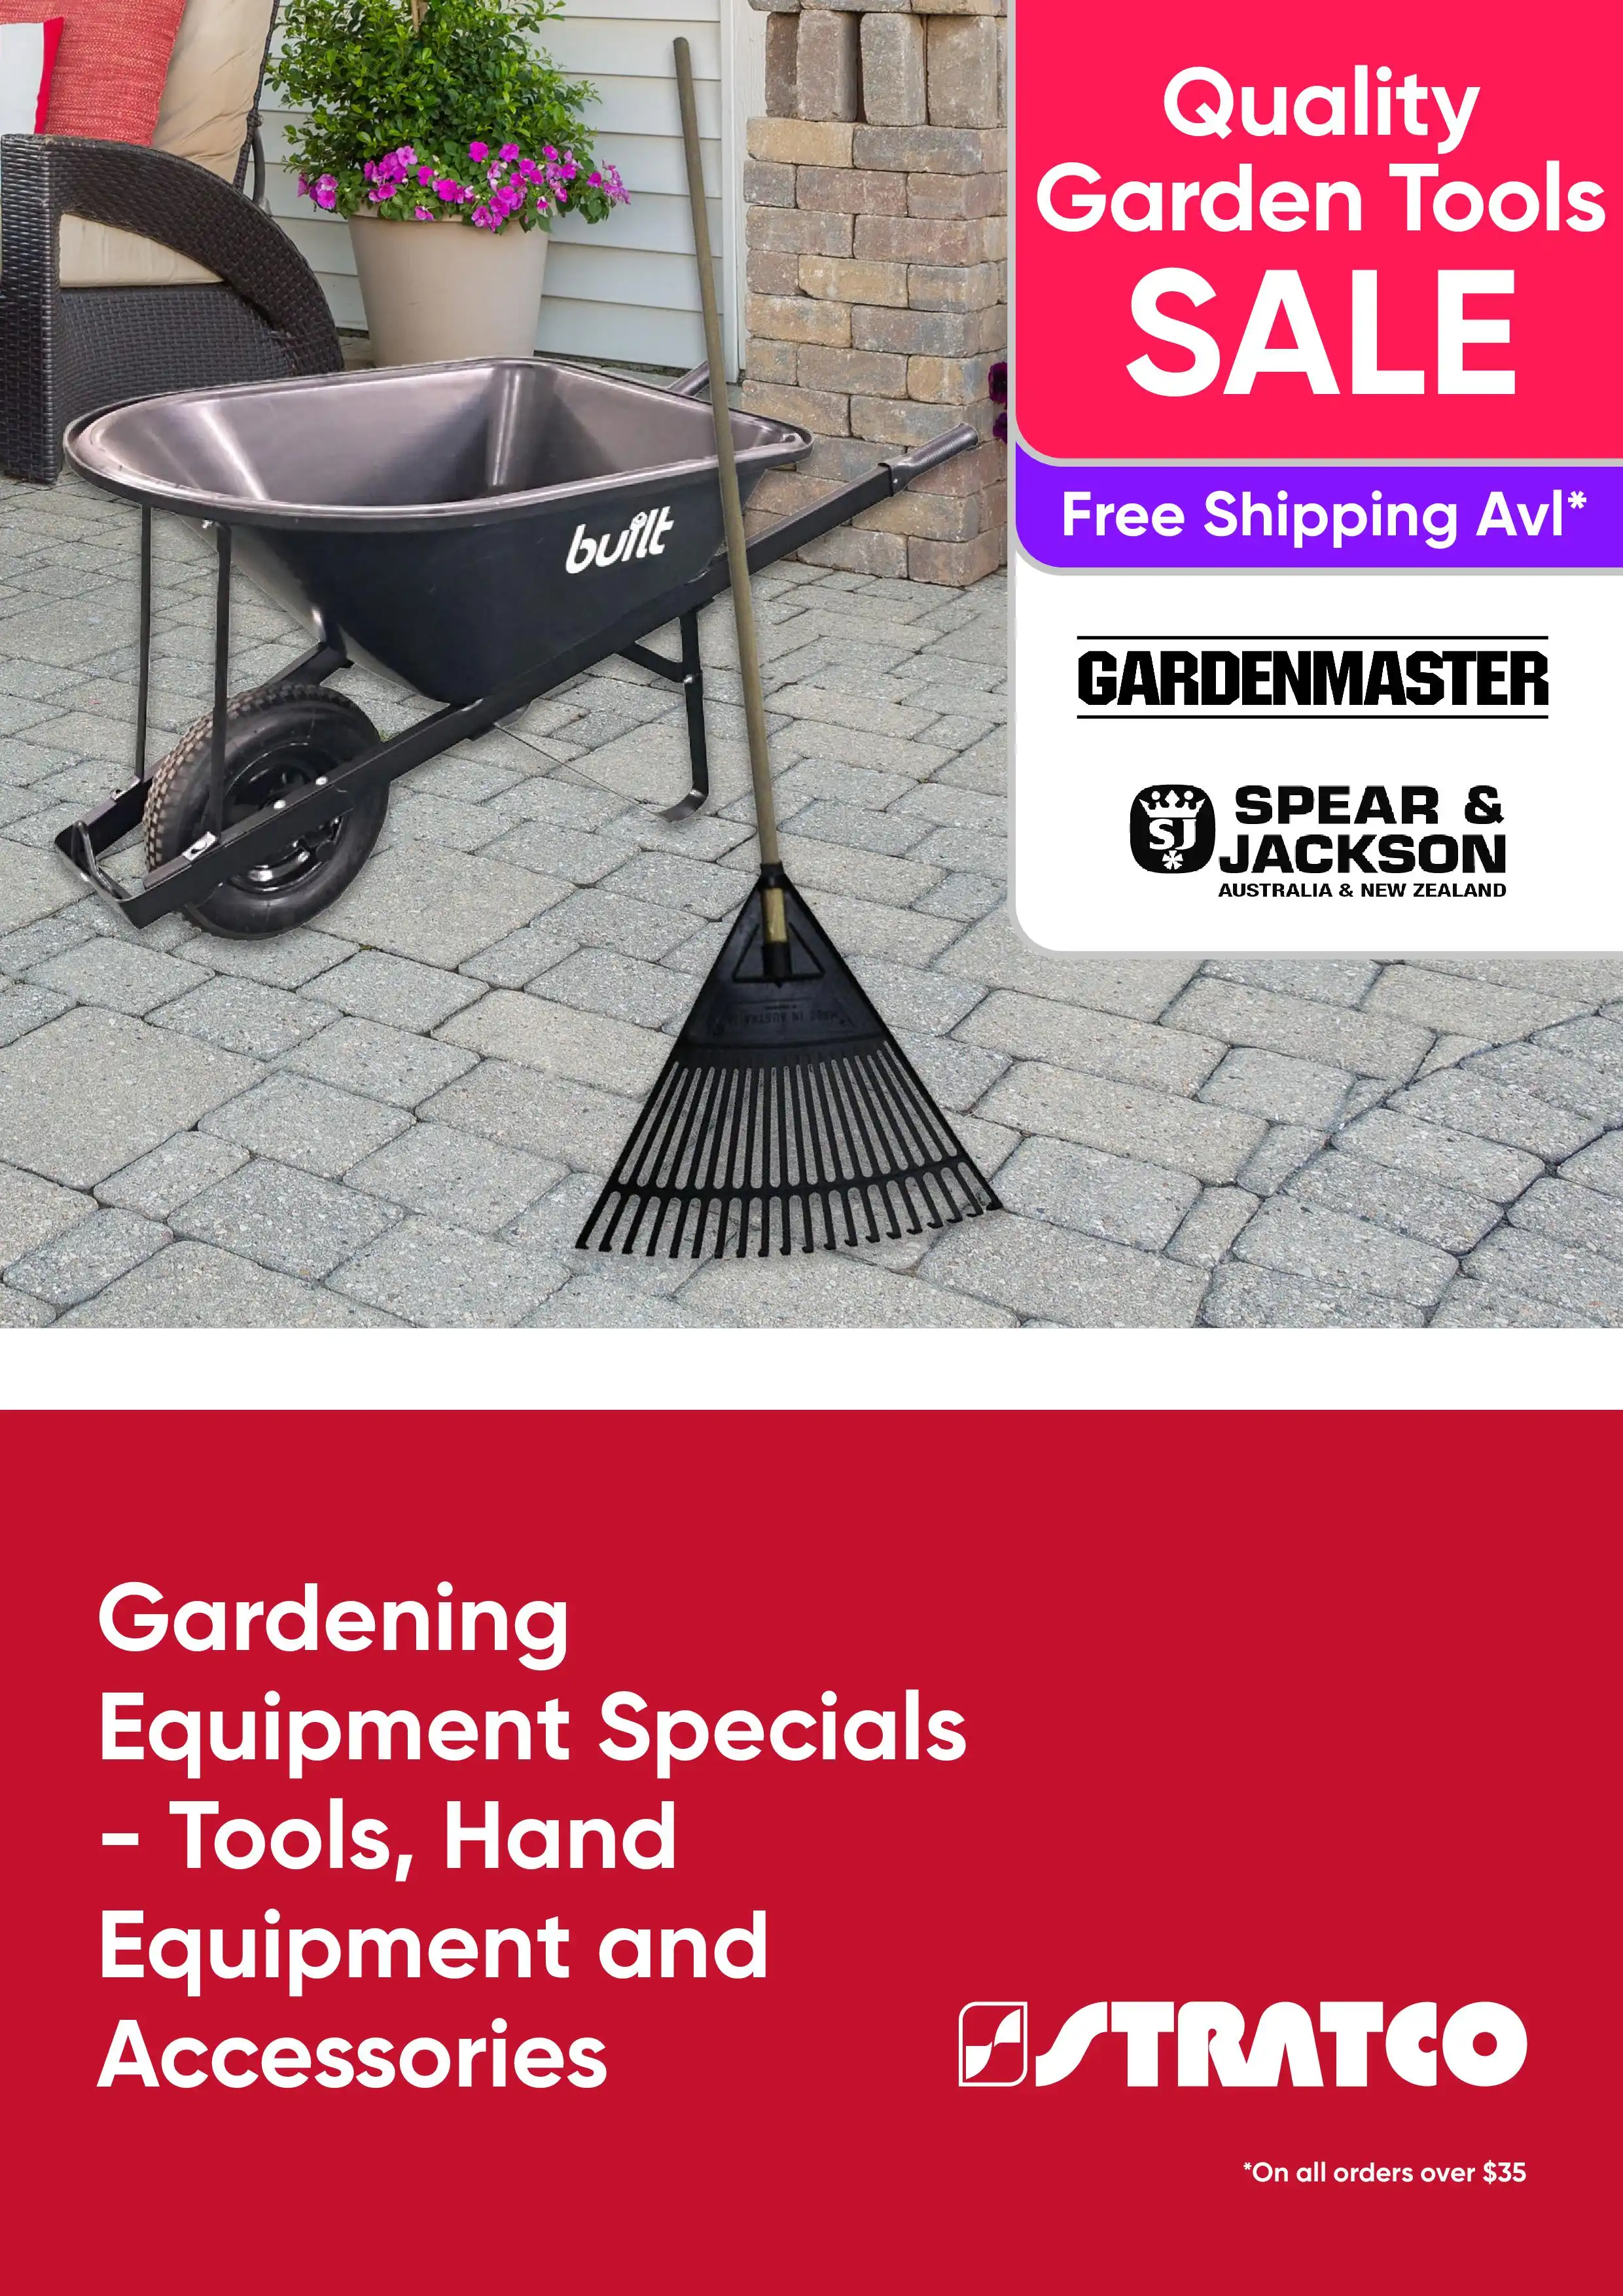 Gardening Equipment Specials - Tools, Hand Equipment and Accessories - NSW